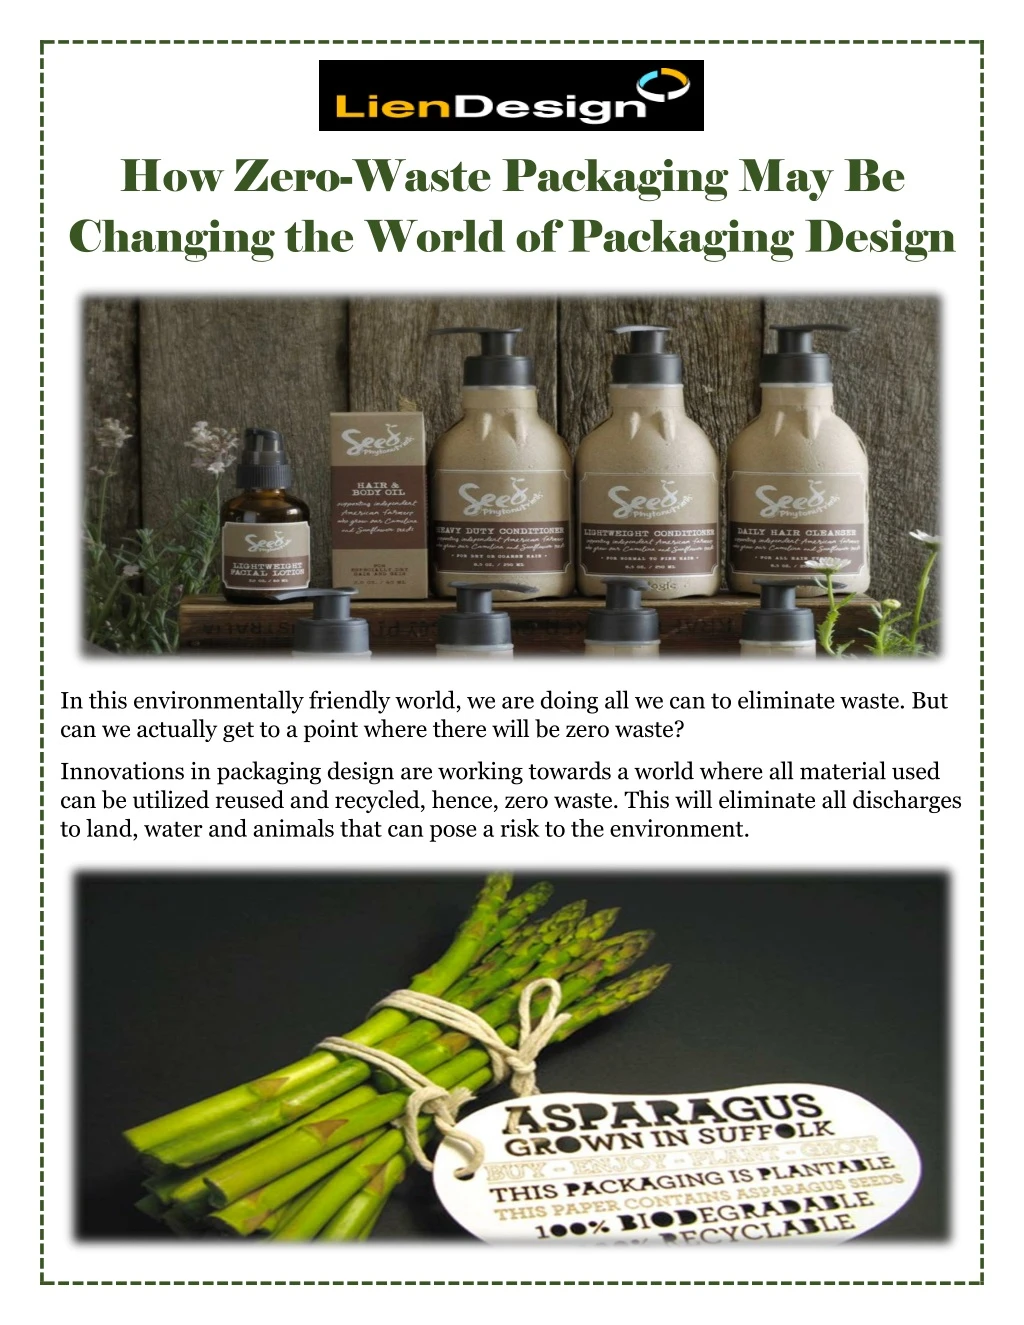 how zero waste packaging may be changing